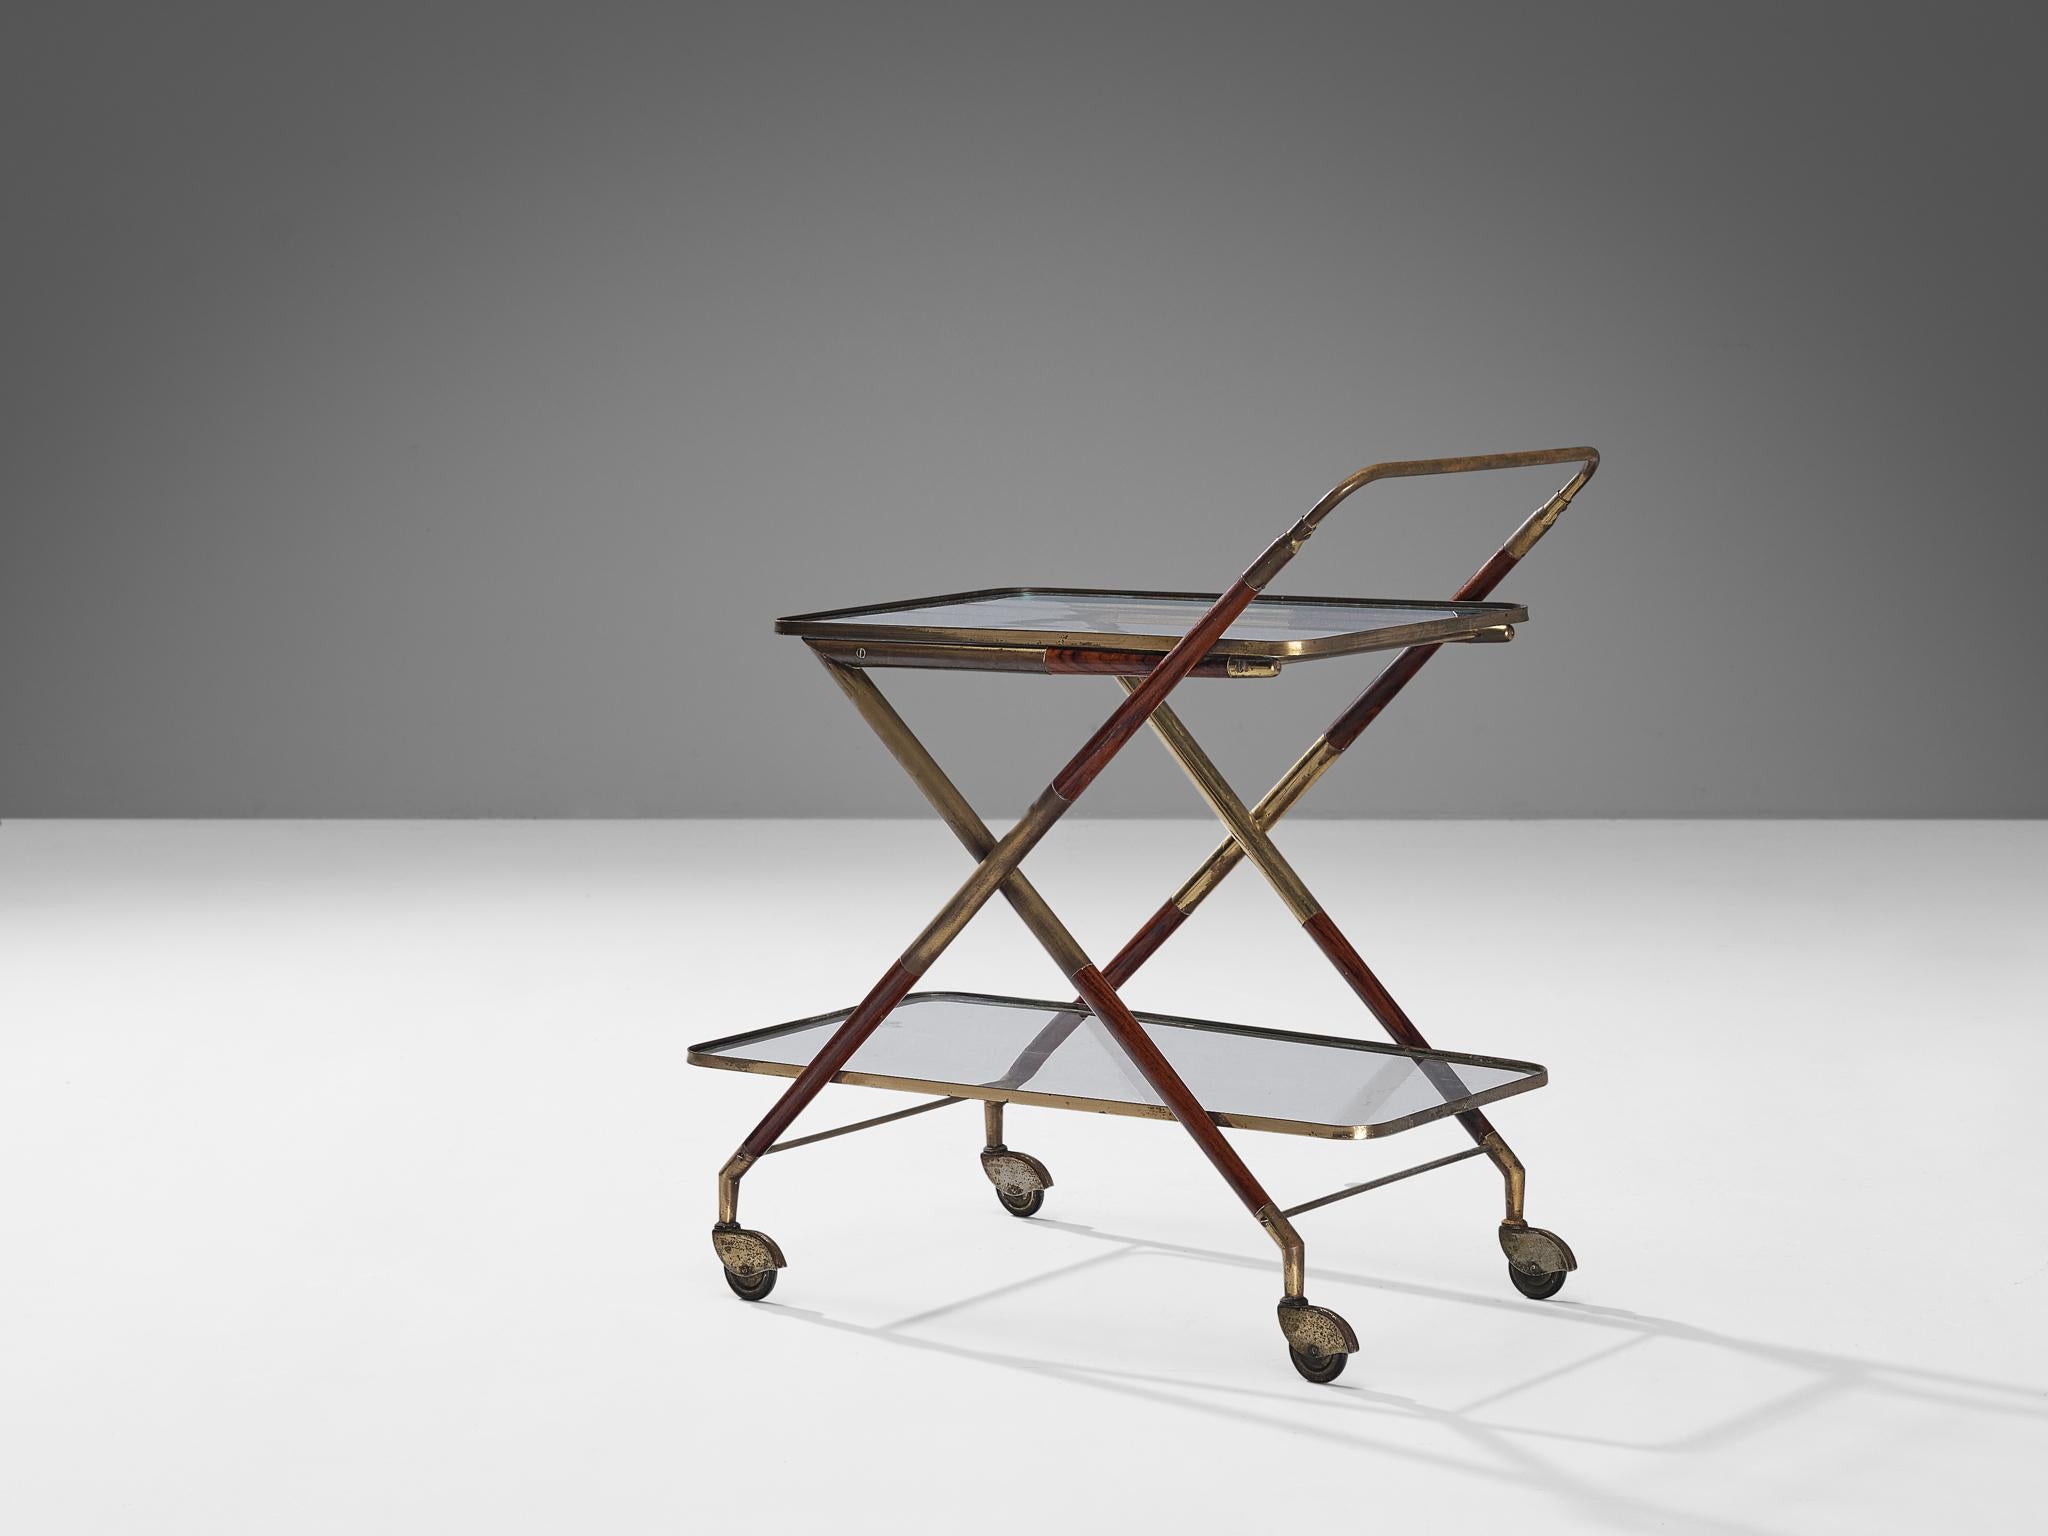 Cesare Lacca, bar cart, wood, brass, glass, Italy, 1950s

Serving trolley or bar cart created by Italian designer Cesare Lacca. The whole construction of this serving trolley is based on clear lines and round edges. Two glass trays establish